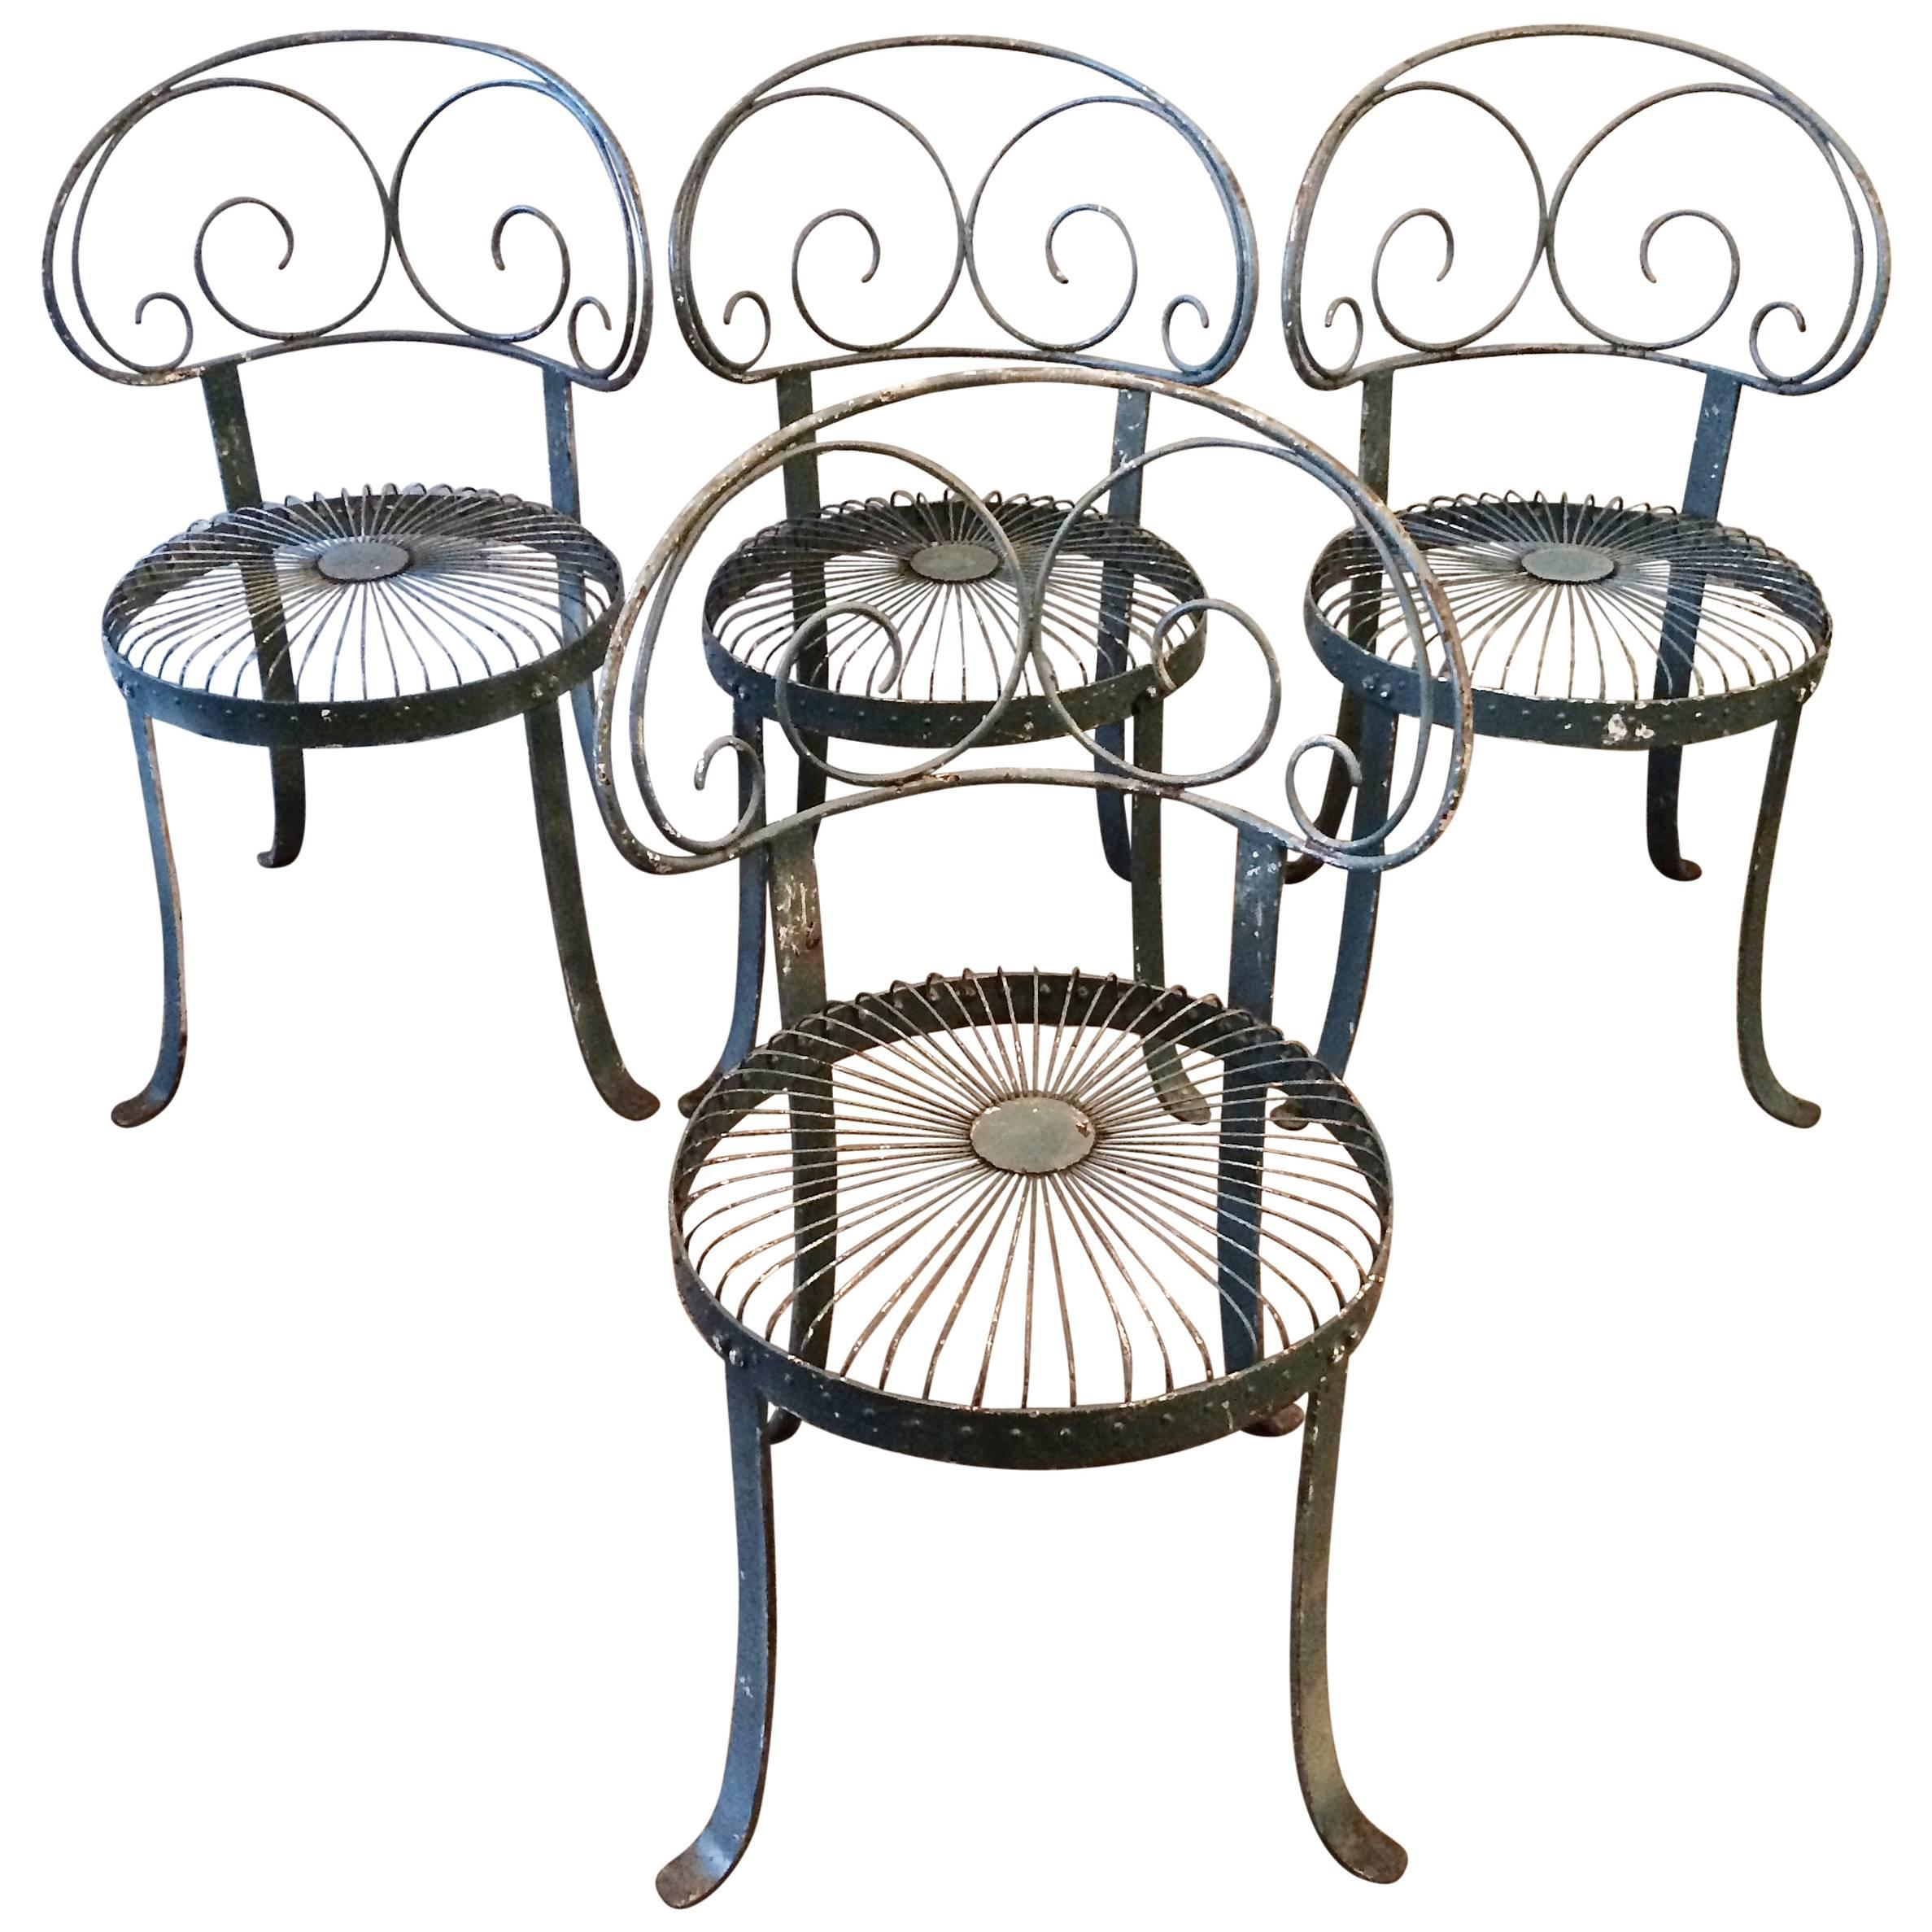 Set of Green Wrought Iron Scroll-Back Garden Chairs